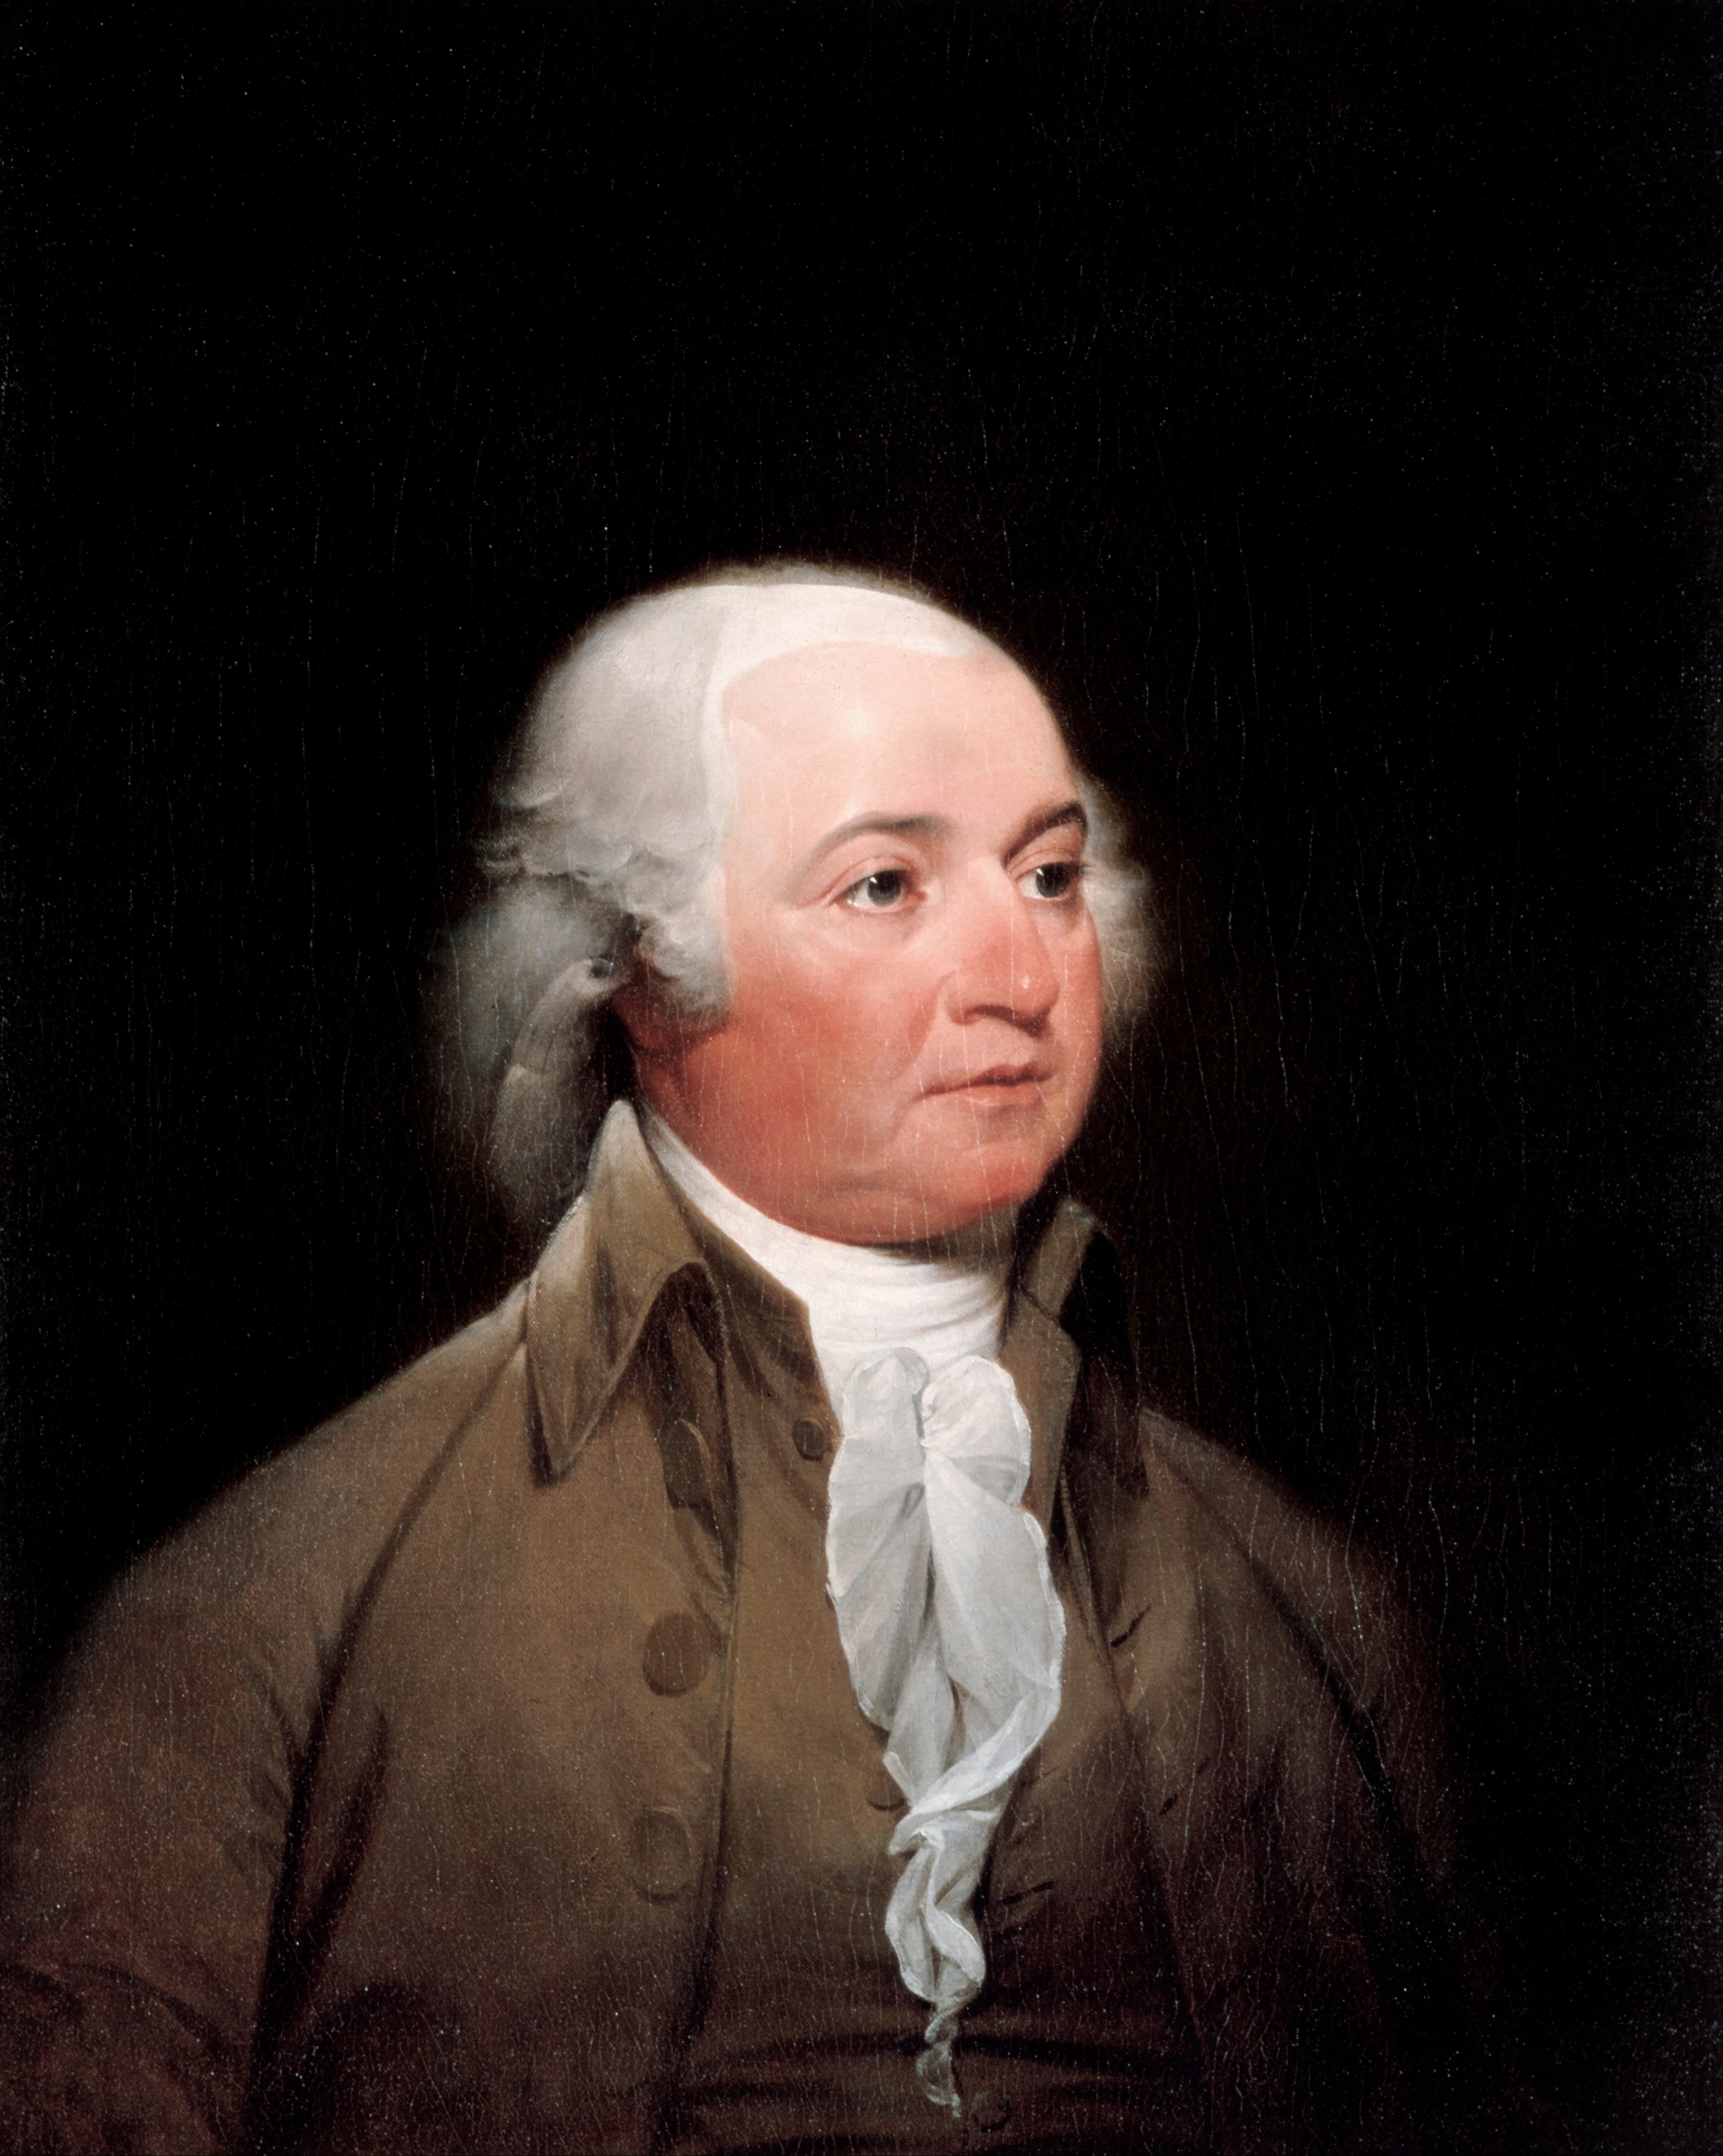 On this day in history, May 15, 1800, President Adams moves federal government from Philadelphia to DC